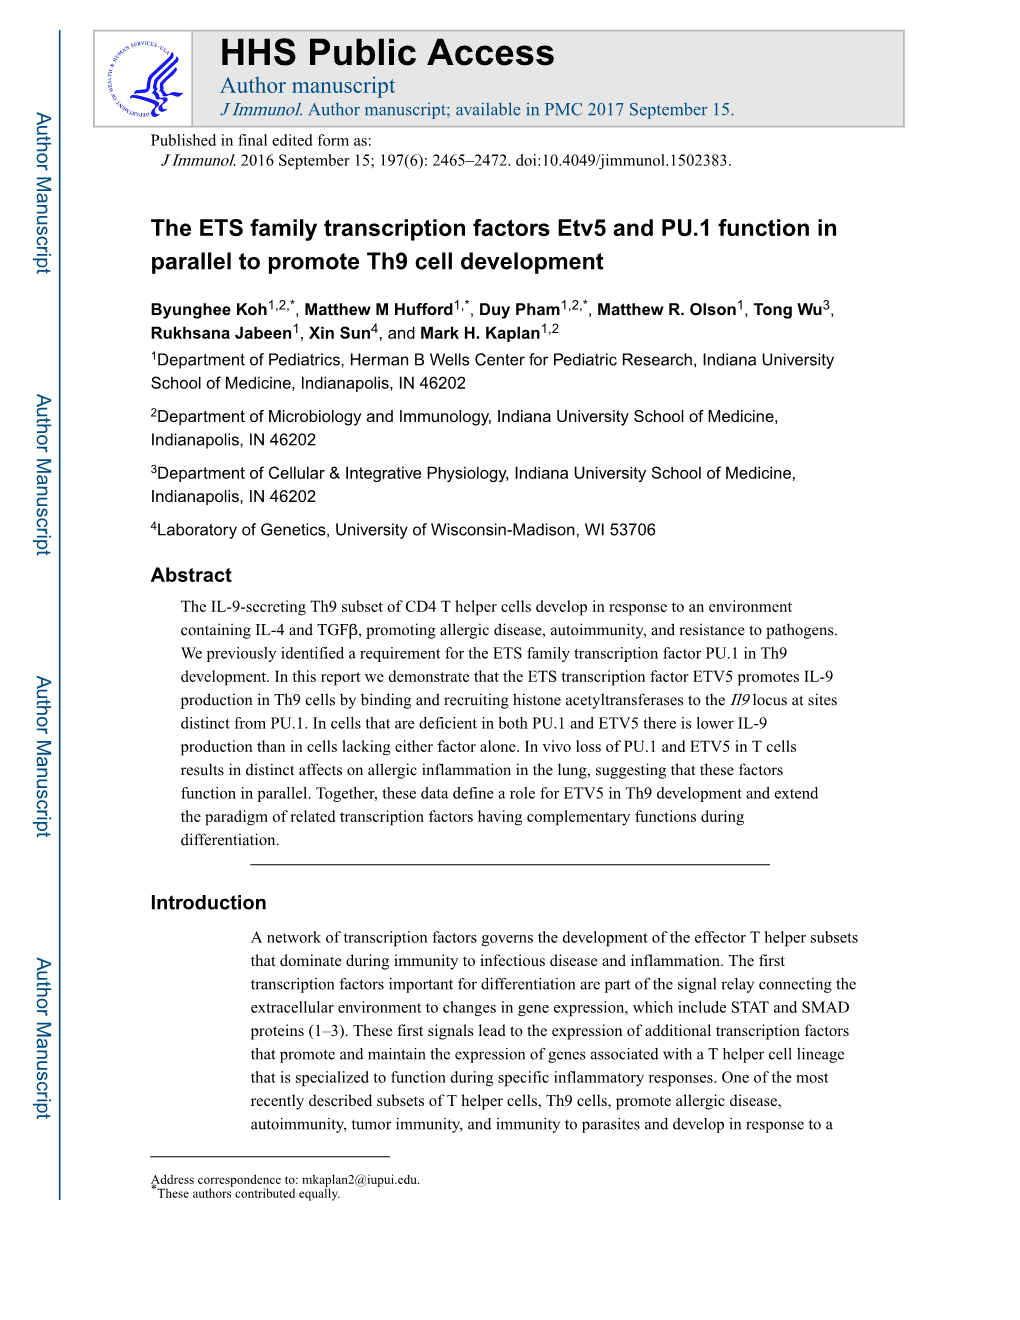 The ETS Family Transcription Factors Etv5 and PU.1 Function in Parallel to Promote Th9 Cell Development